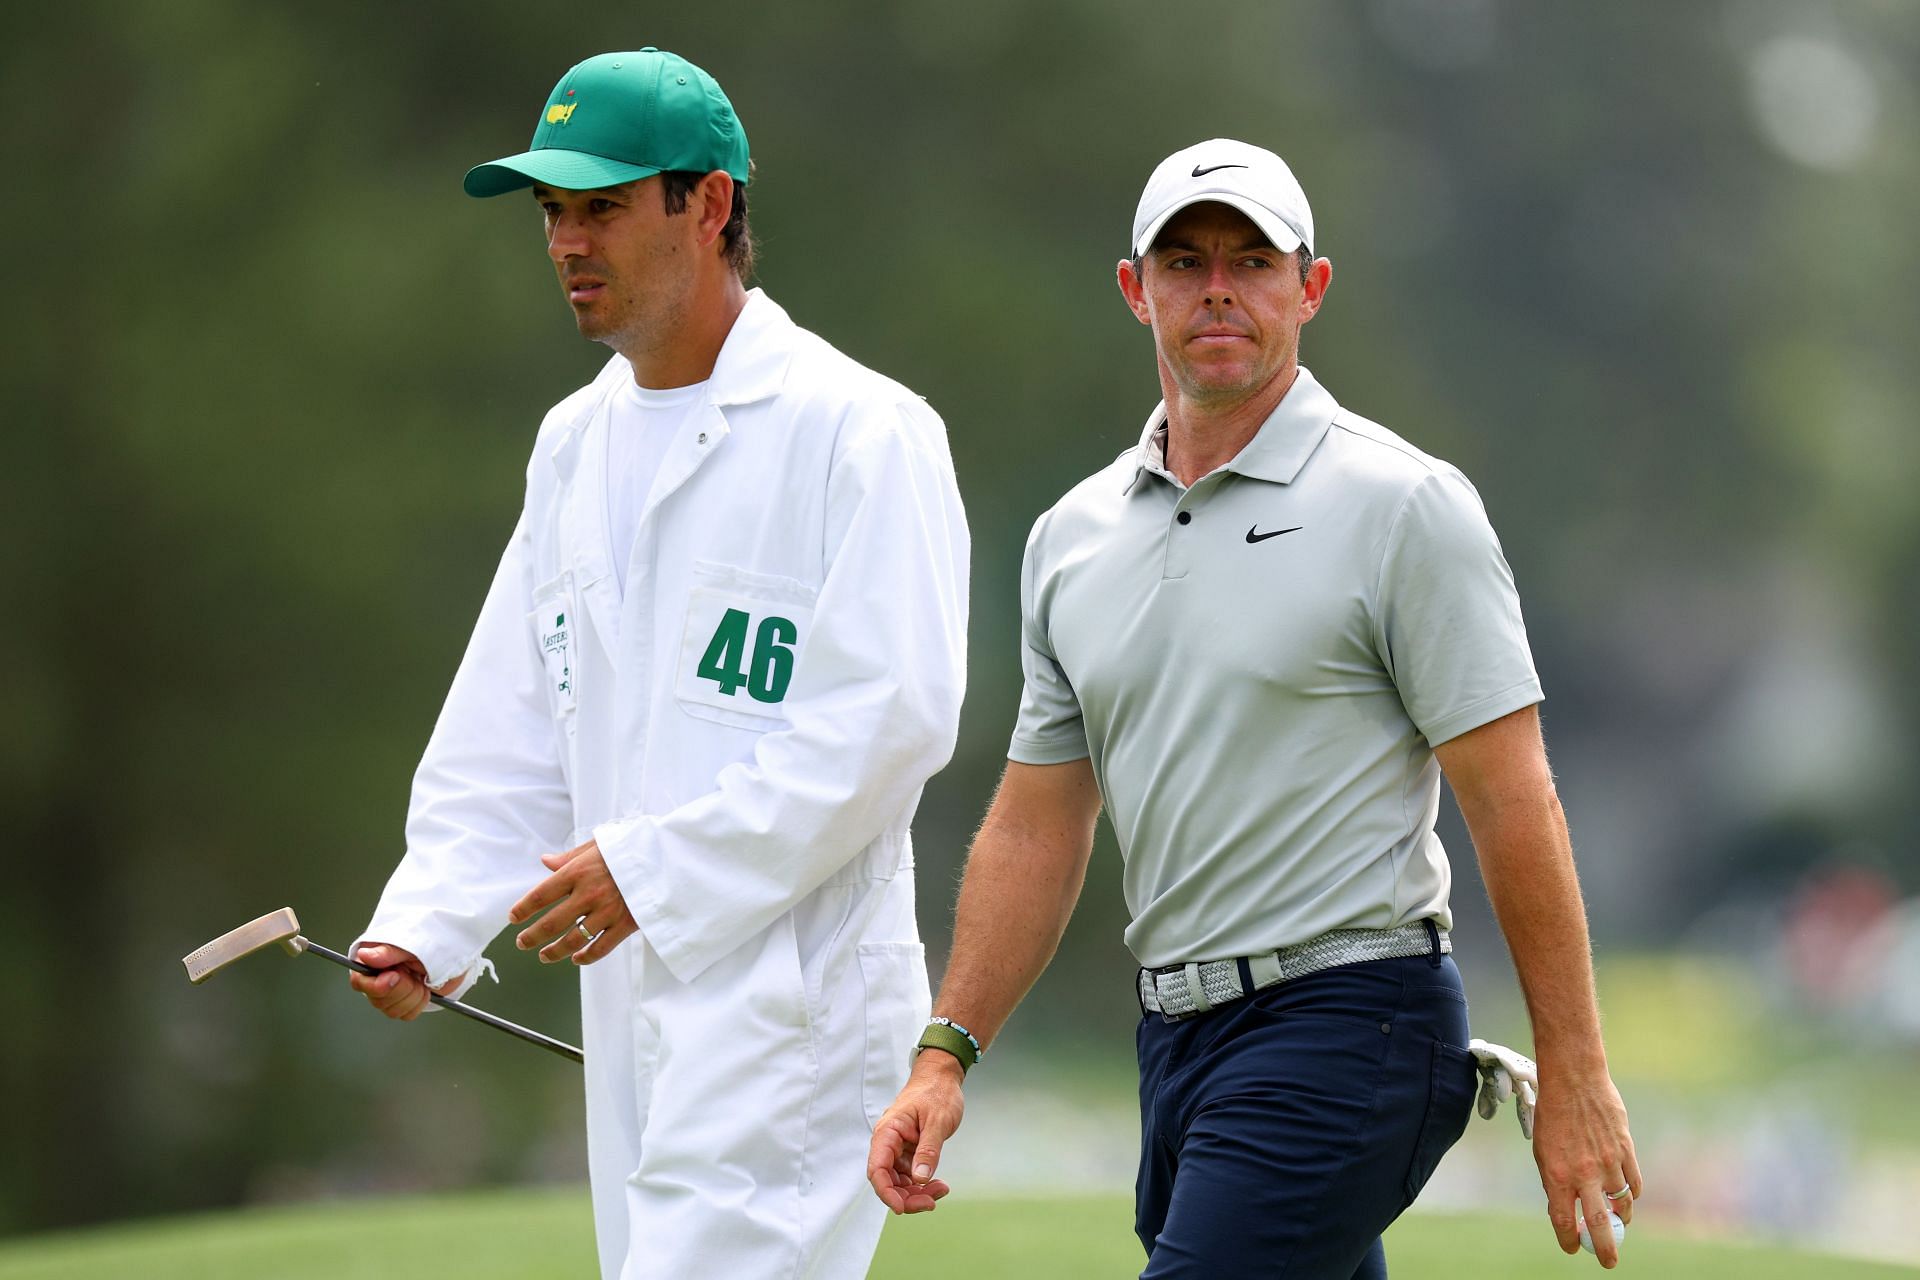 McIlroy will have to wait for the career grand slam as he crashed out of the 2023 Masters